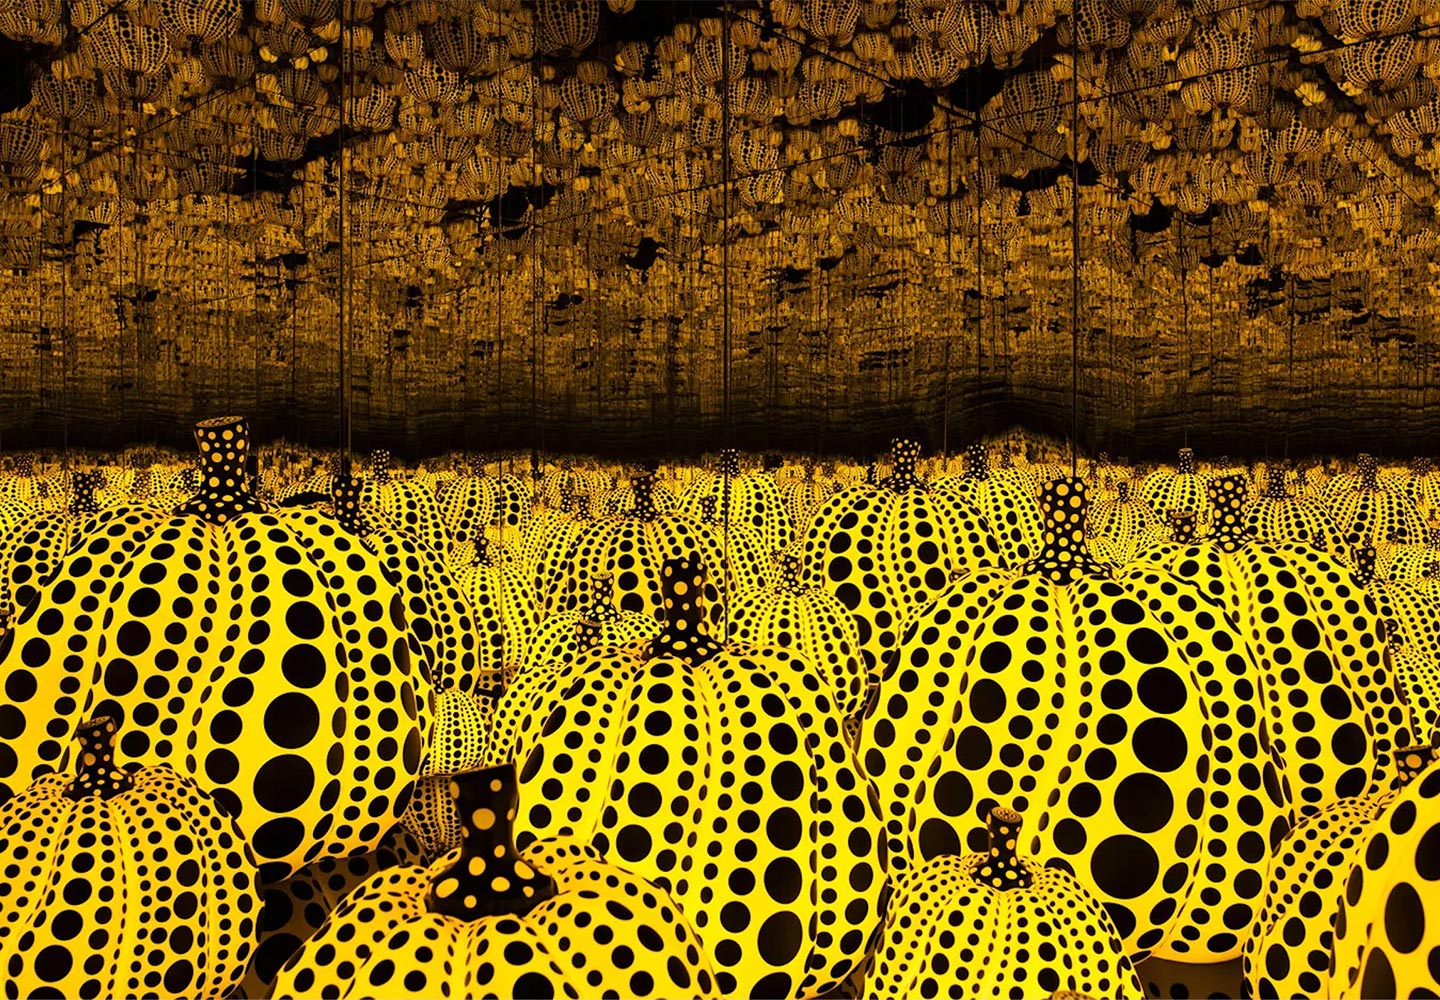 Yayoi Kusama's All the Eternal Love I Have for the Pumpkins, 2016